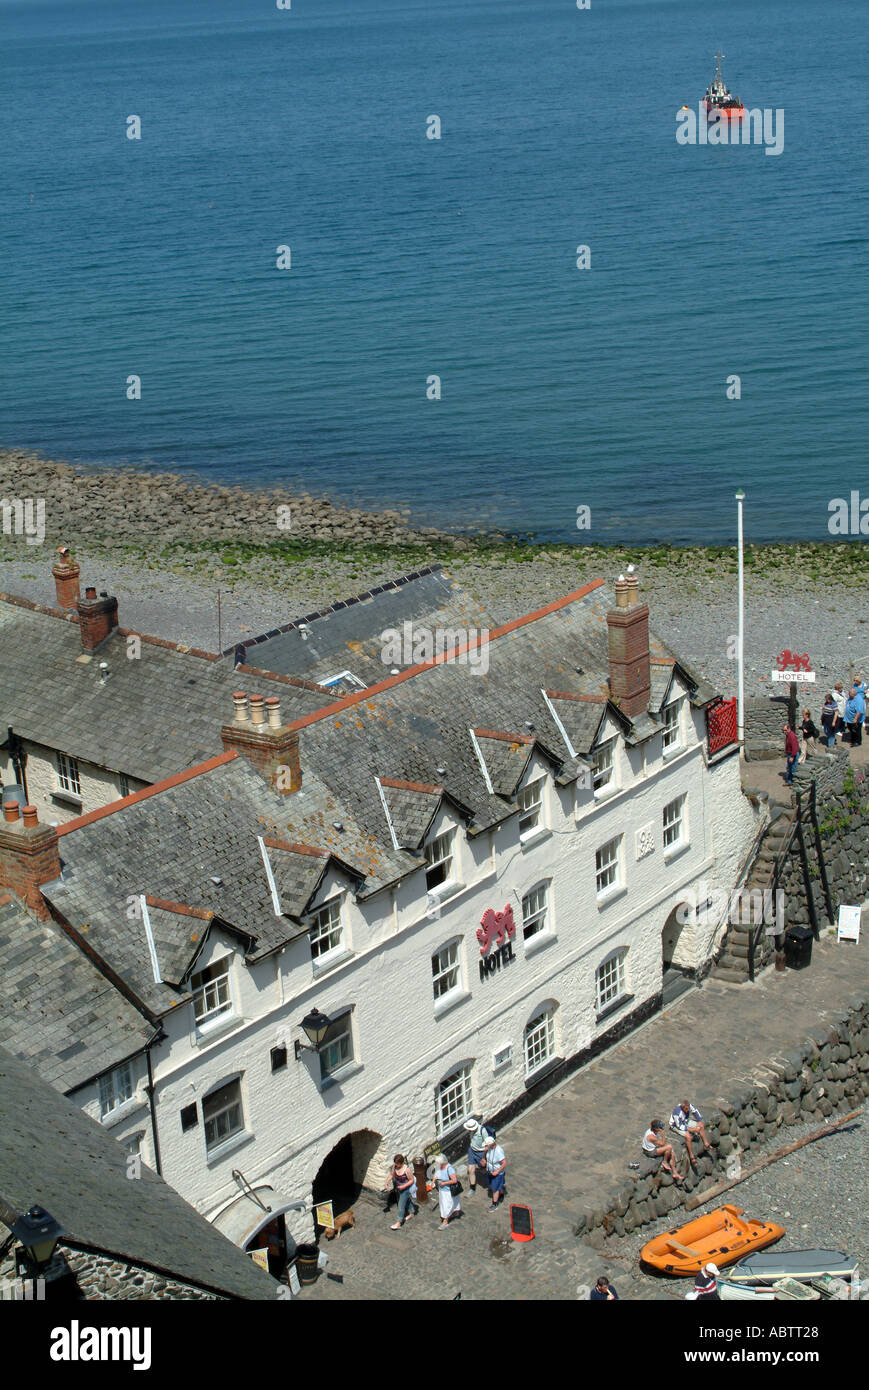 Aerial View of Red Lion Hotel and Shingle Beach at Clovelly Fishing Village North Devon England United Kingdom UK Stock Photo